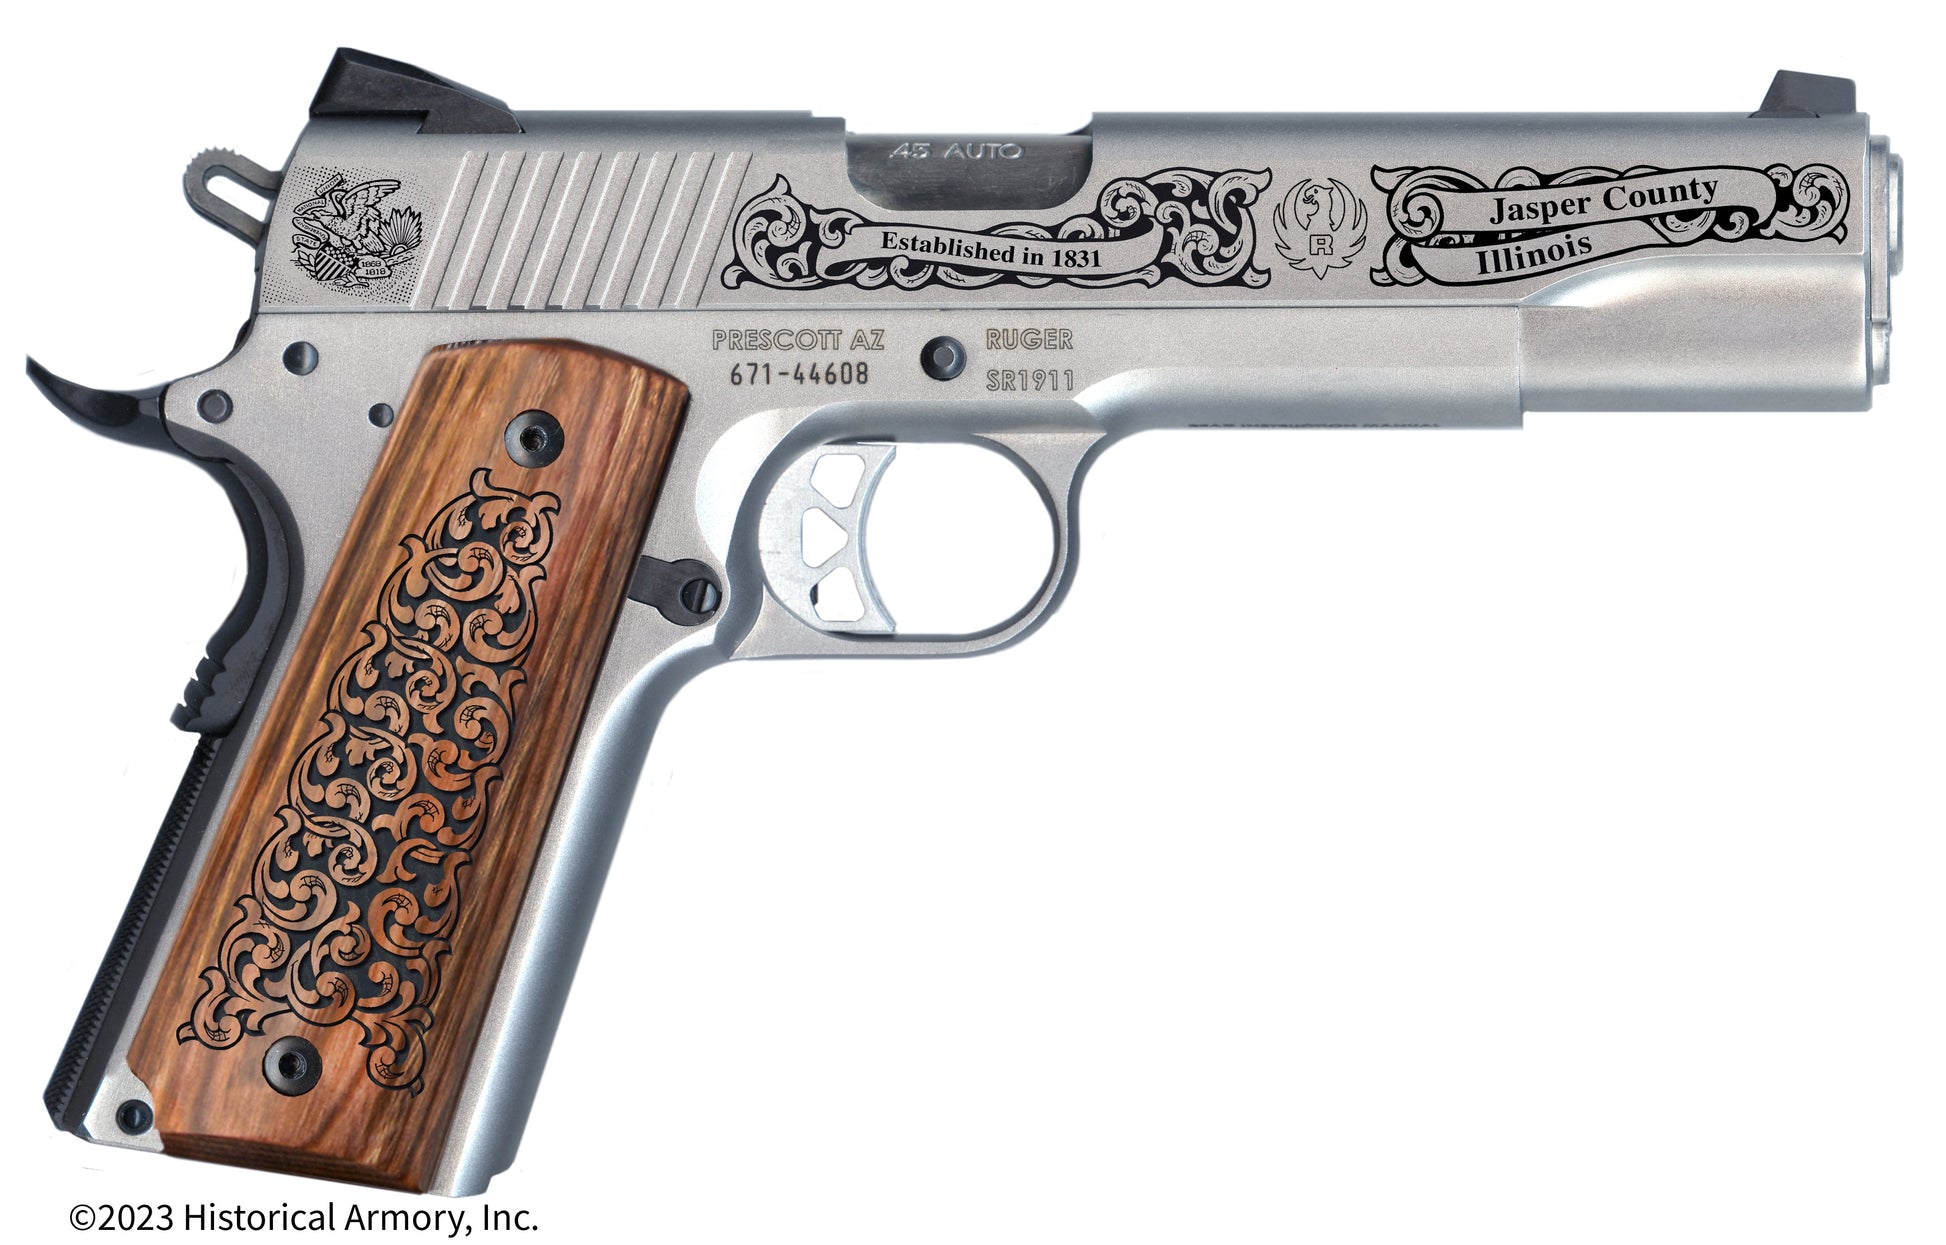 Jasper County Illinois Engraved .45 Auto Ruger 1911